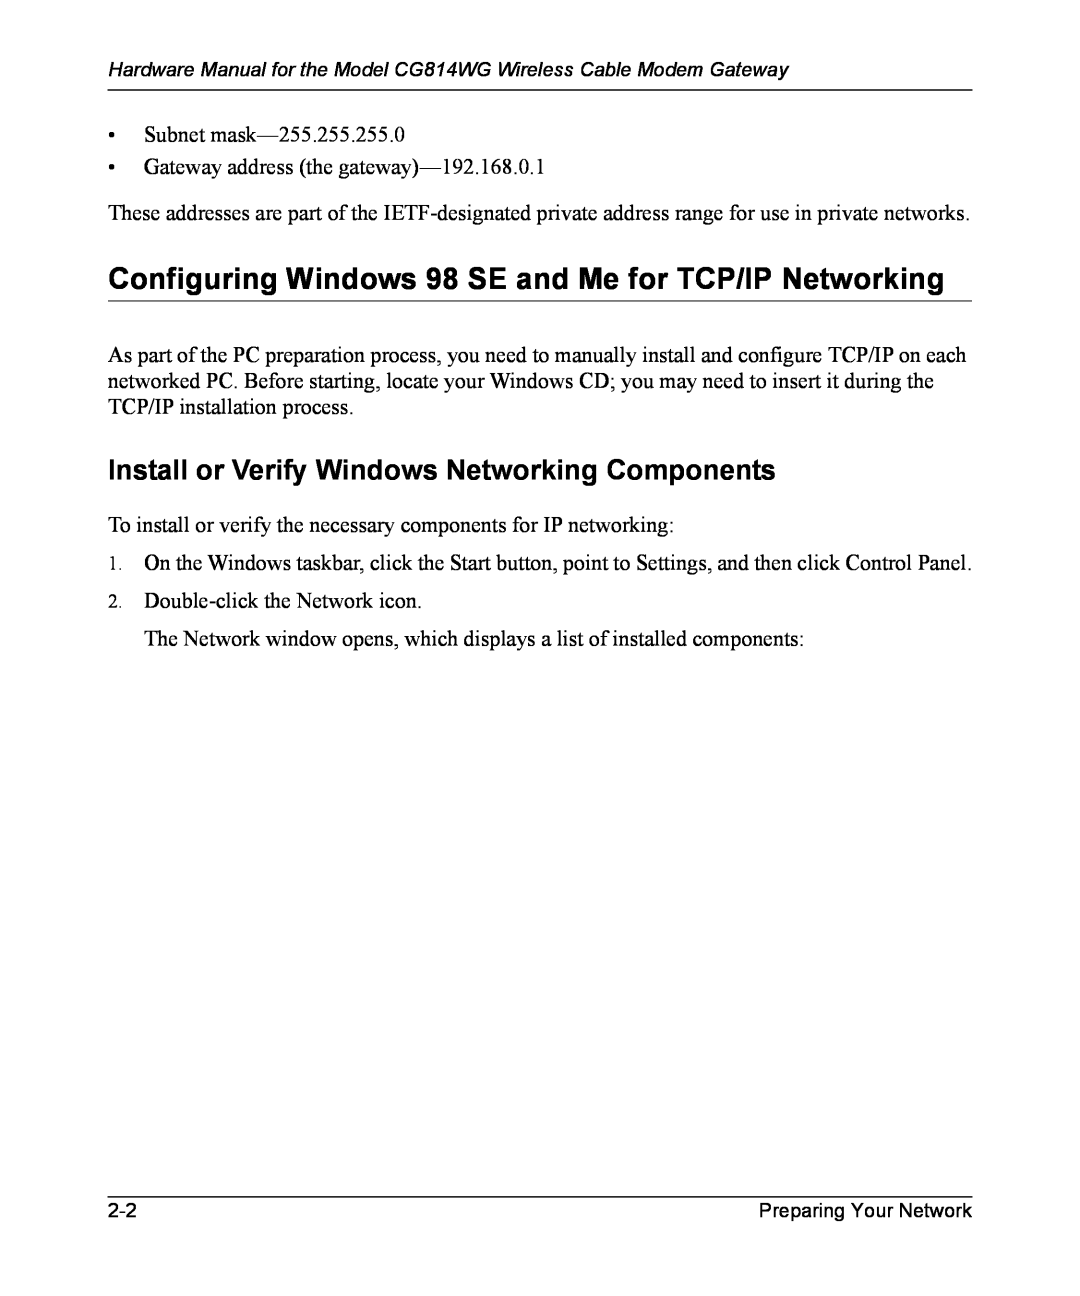 NETGEAR CG814WG Configuring Windows 98 SE and Me for TCP/IP Networking, Install or Verify Windows Networking Components 